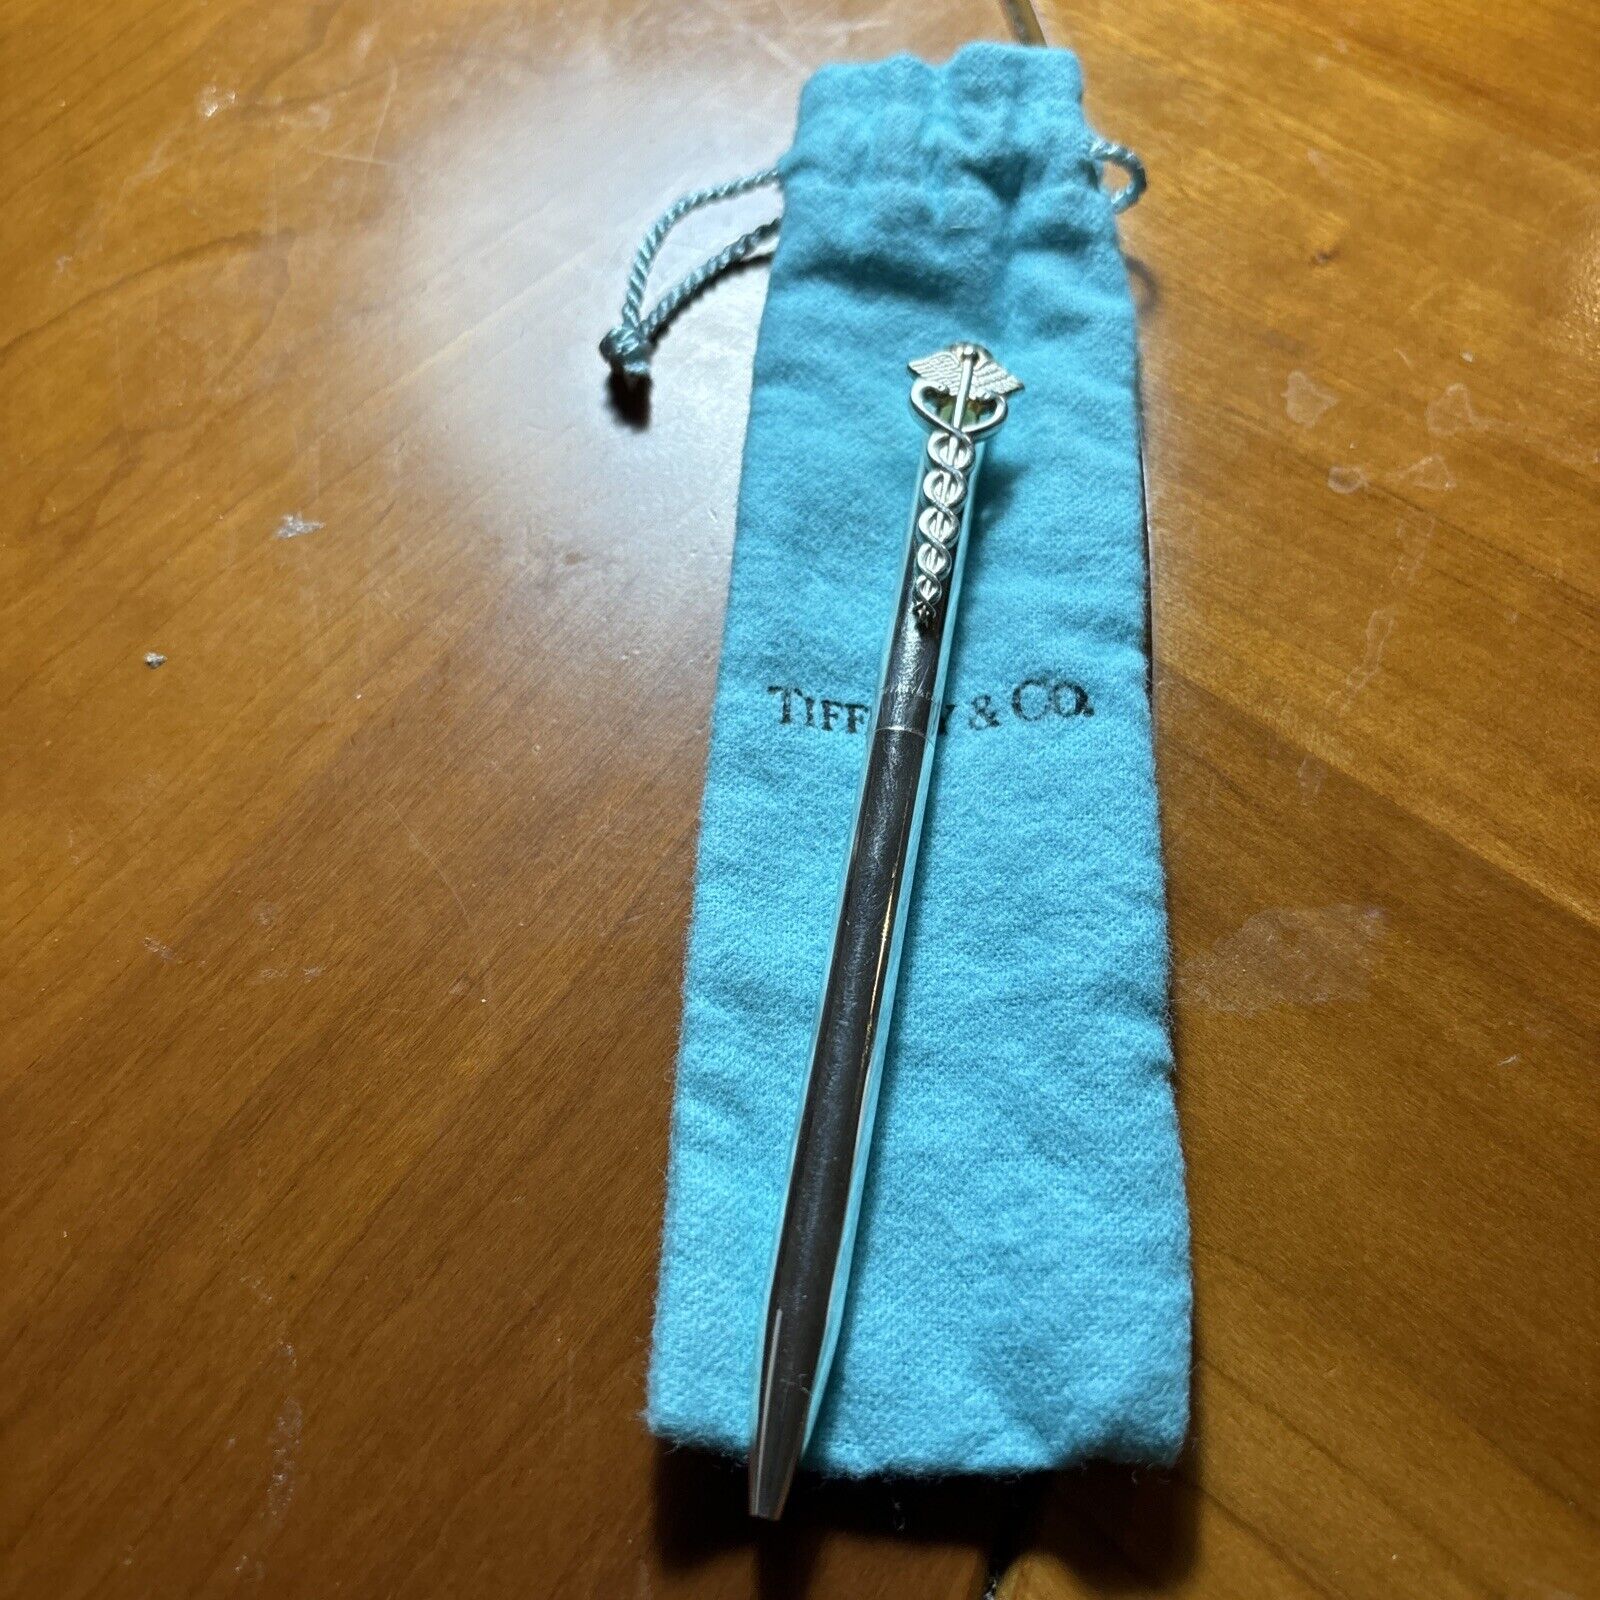 Tiffany & Co Medical Caduceus Clip Retractable Ball Point Pen in Sterling Silver